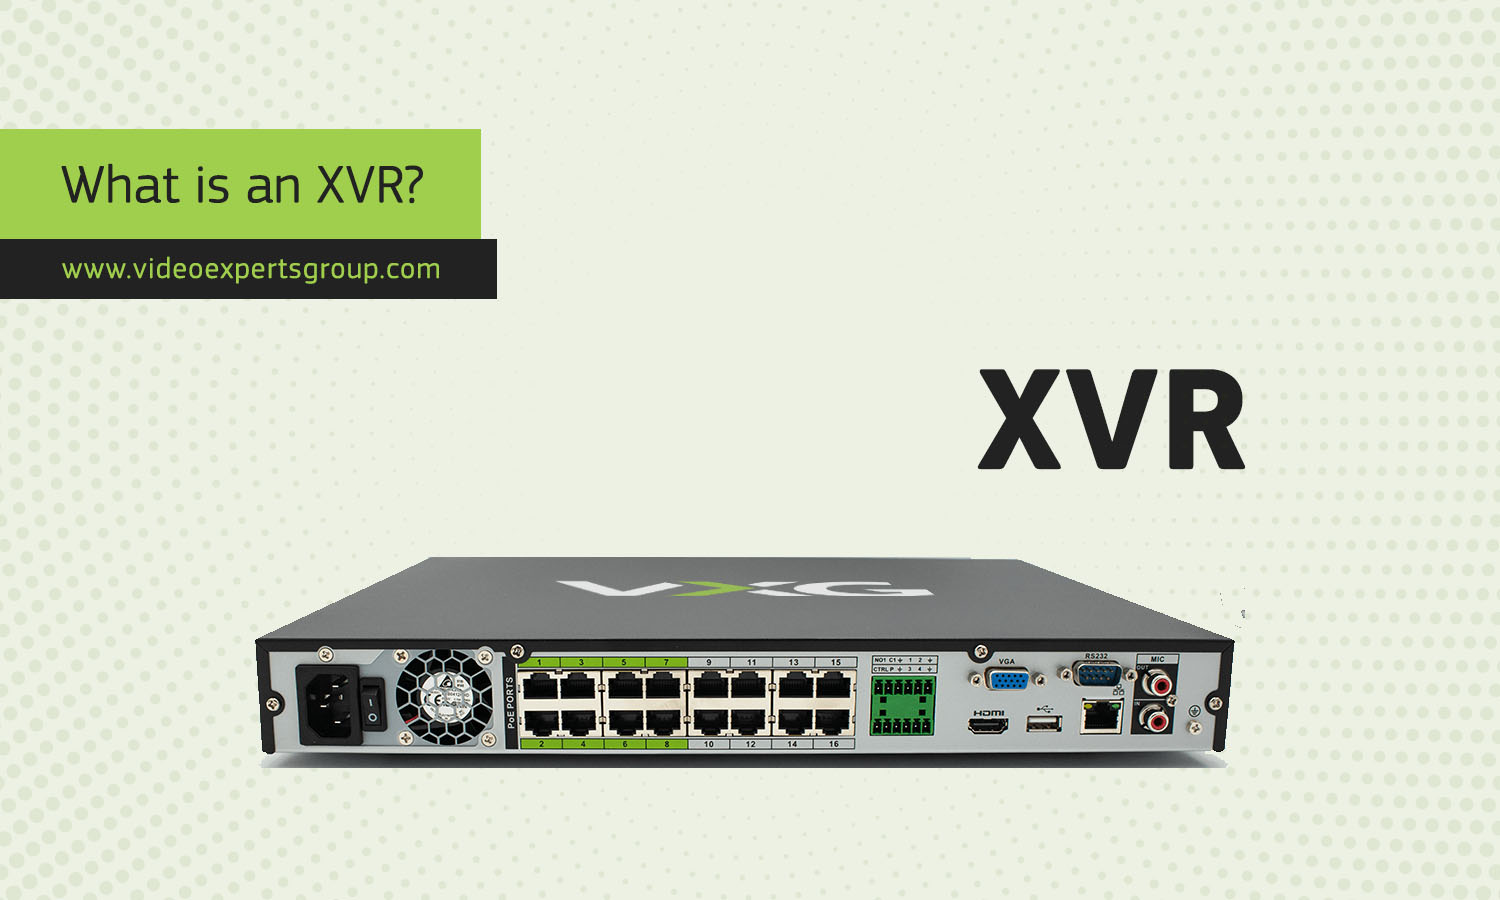 What is an XVR?